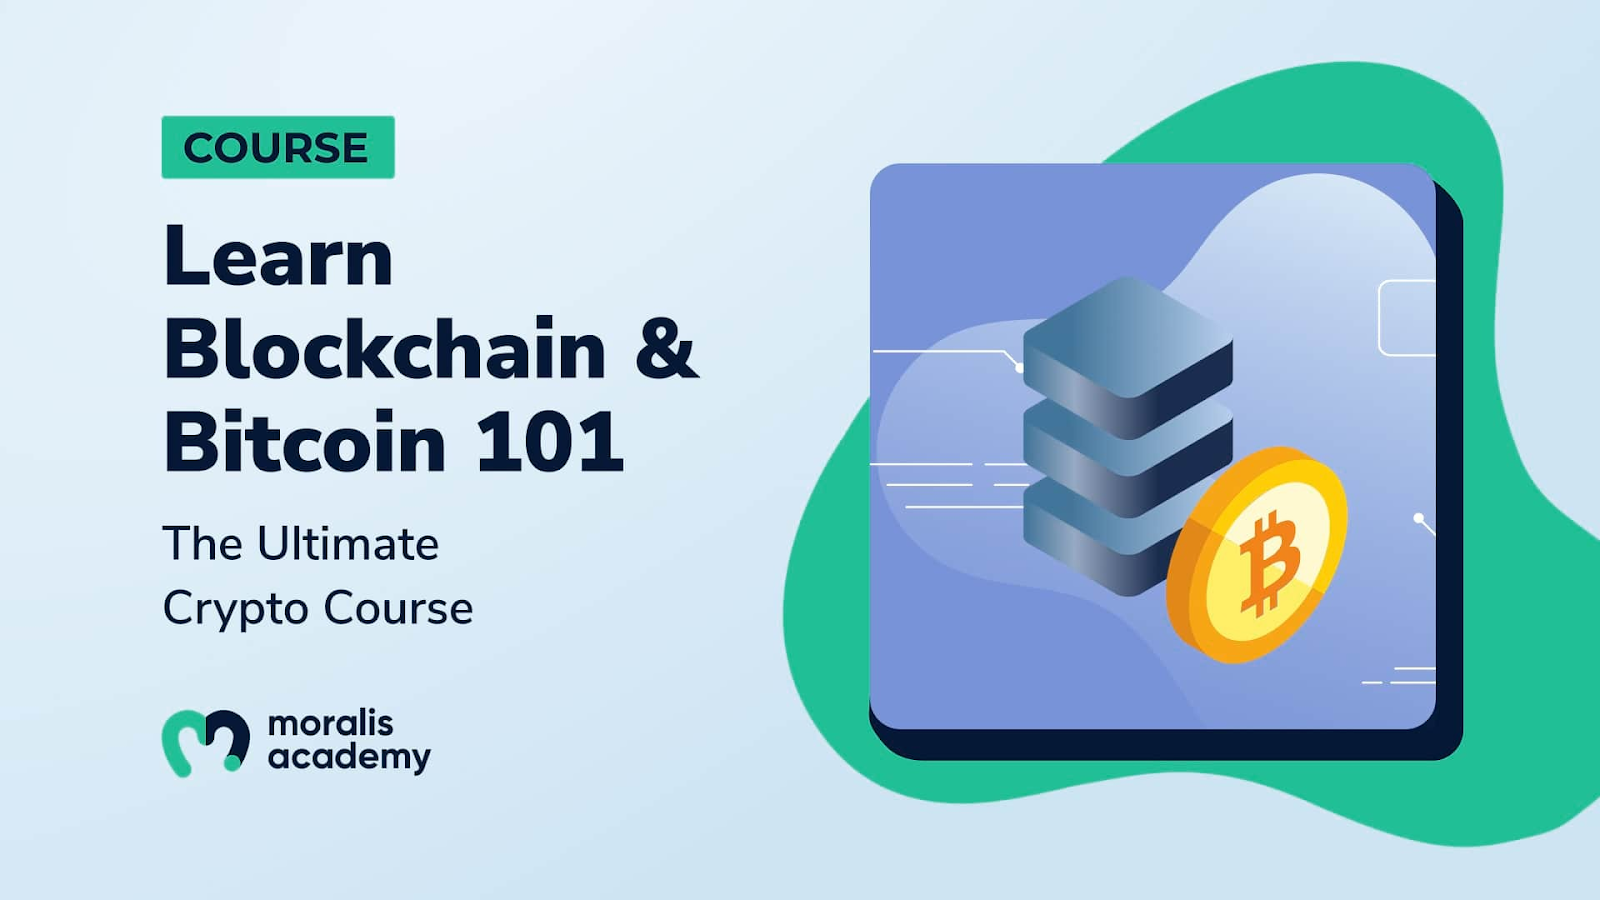 Once you've finished this article on increased electricity prices and Web3, dive into blockchain and Bitcoin with Moralis Academy's ultimate crypto course!